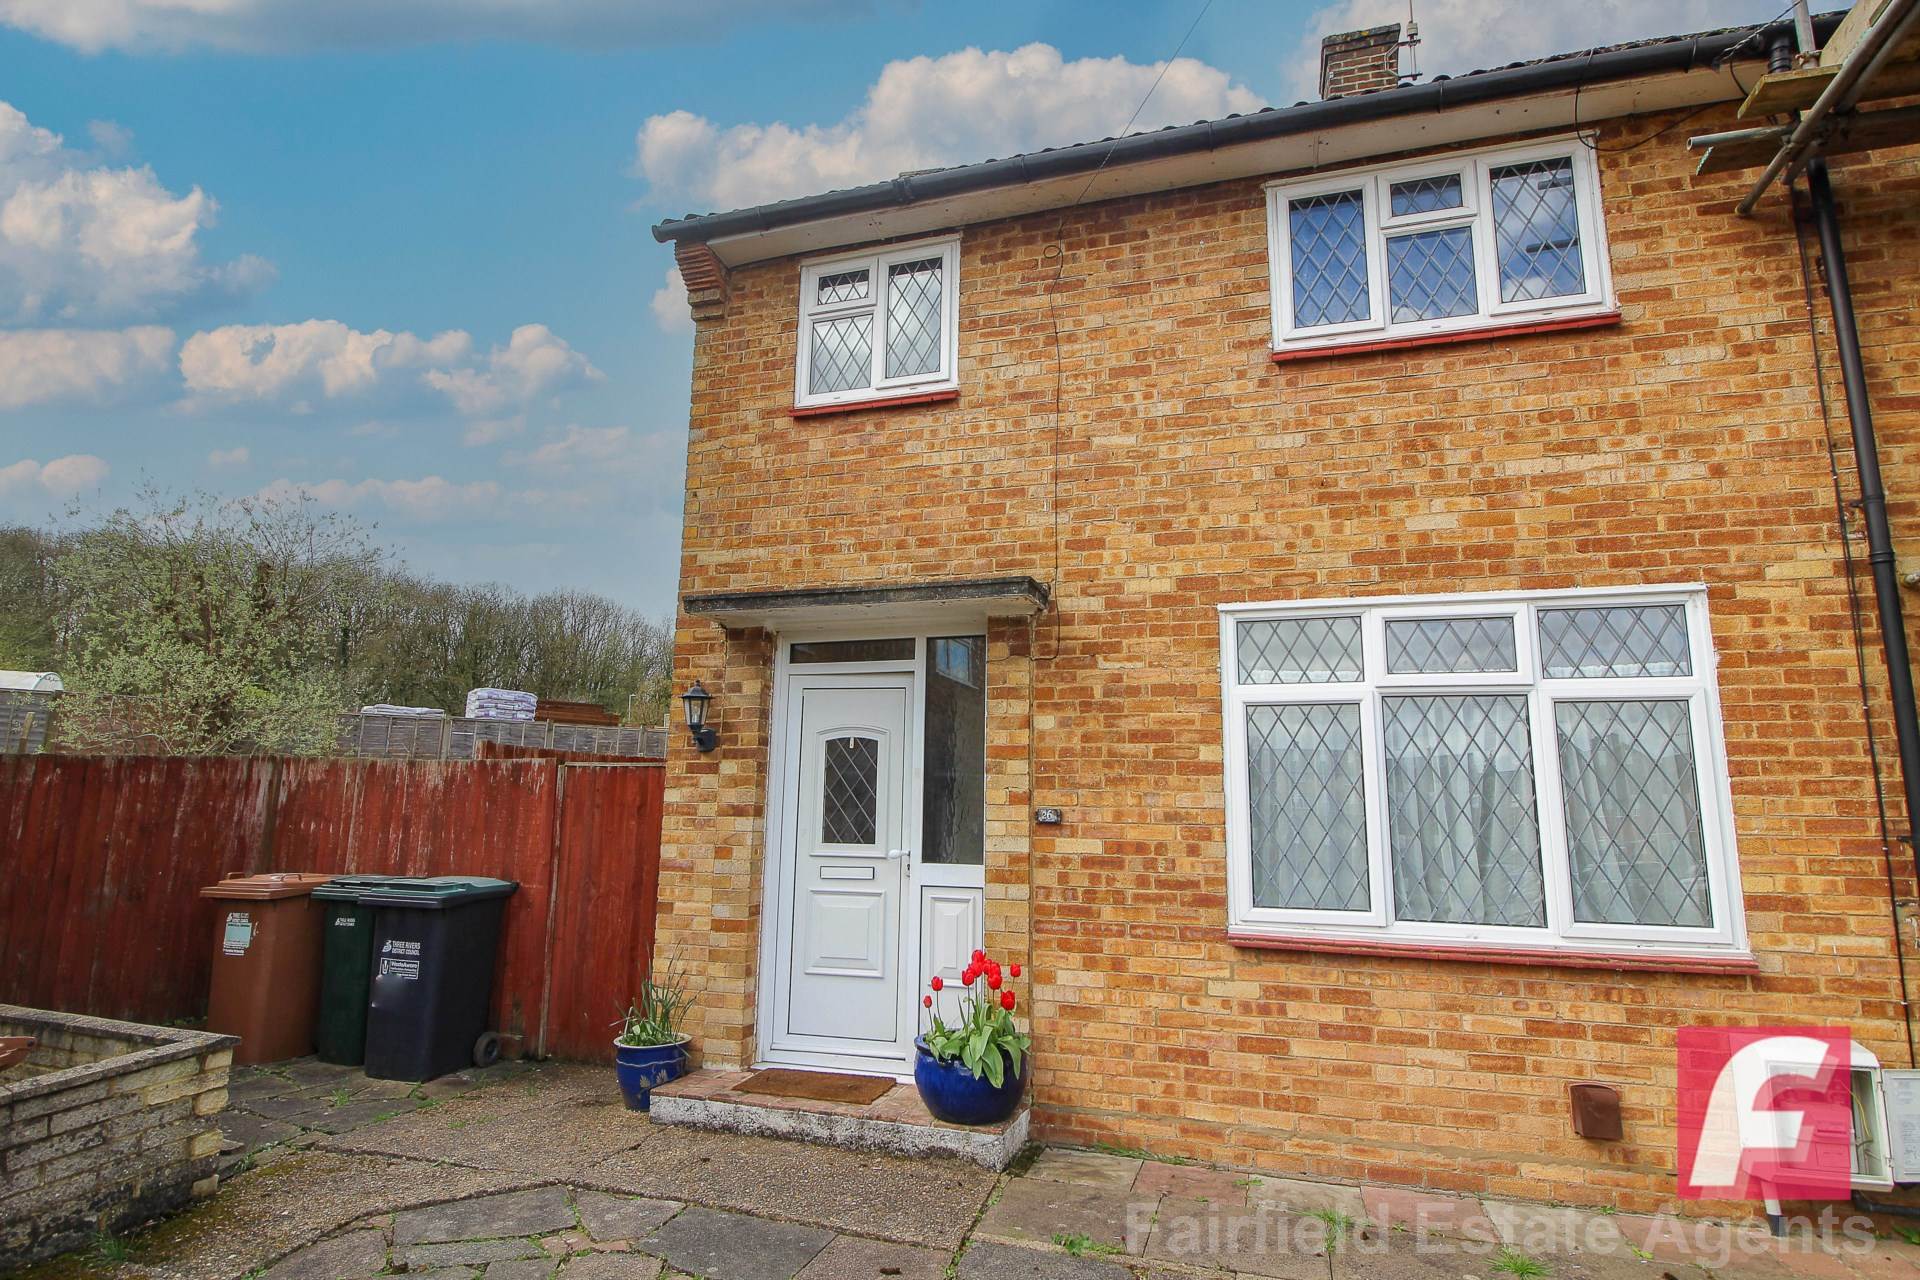 2 bed End Terraced House for rent in Watford. From Fairfield Estate Agents - Oxhey Branch